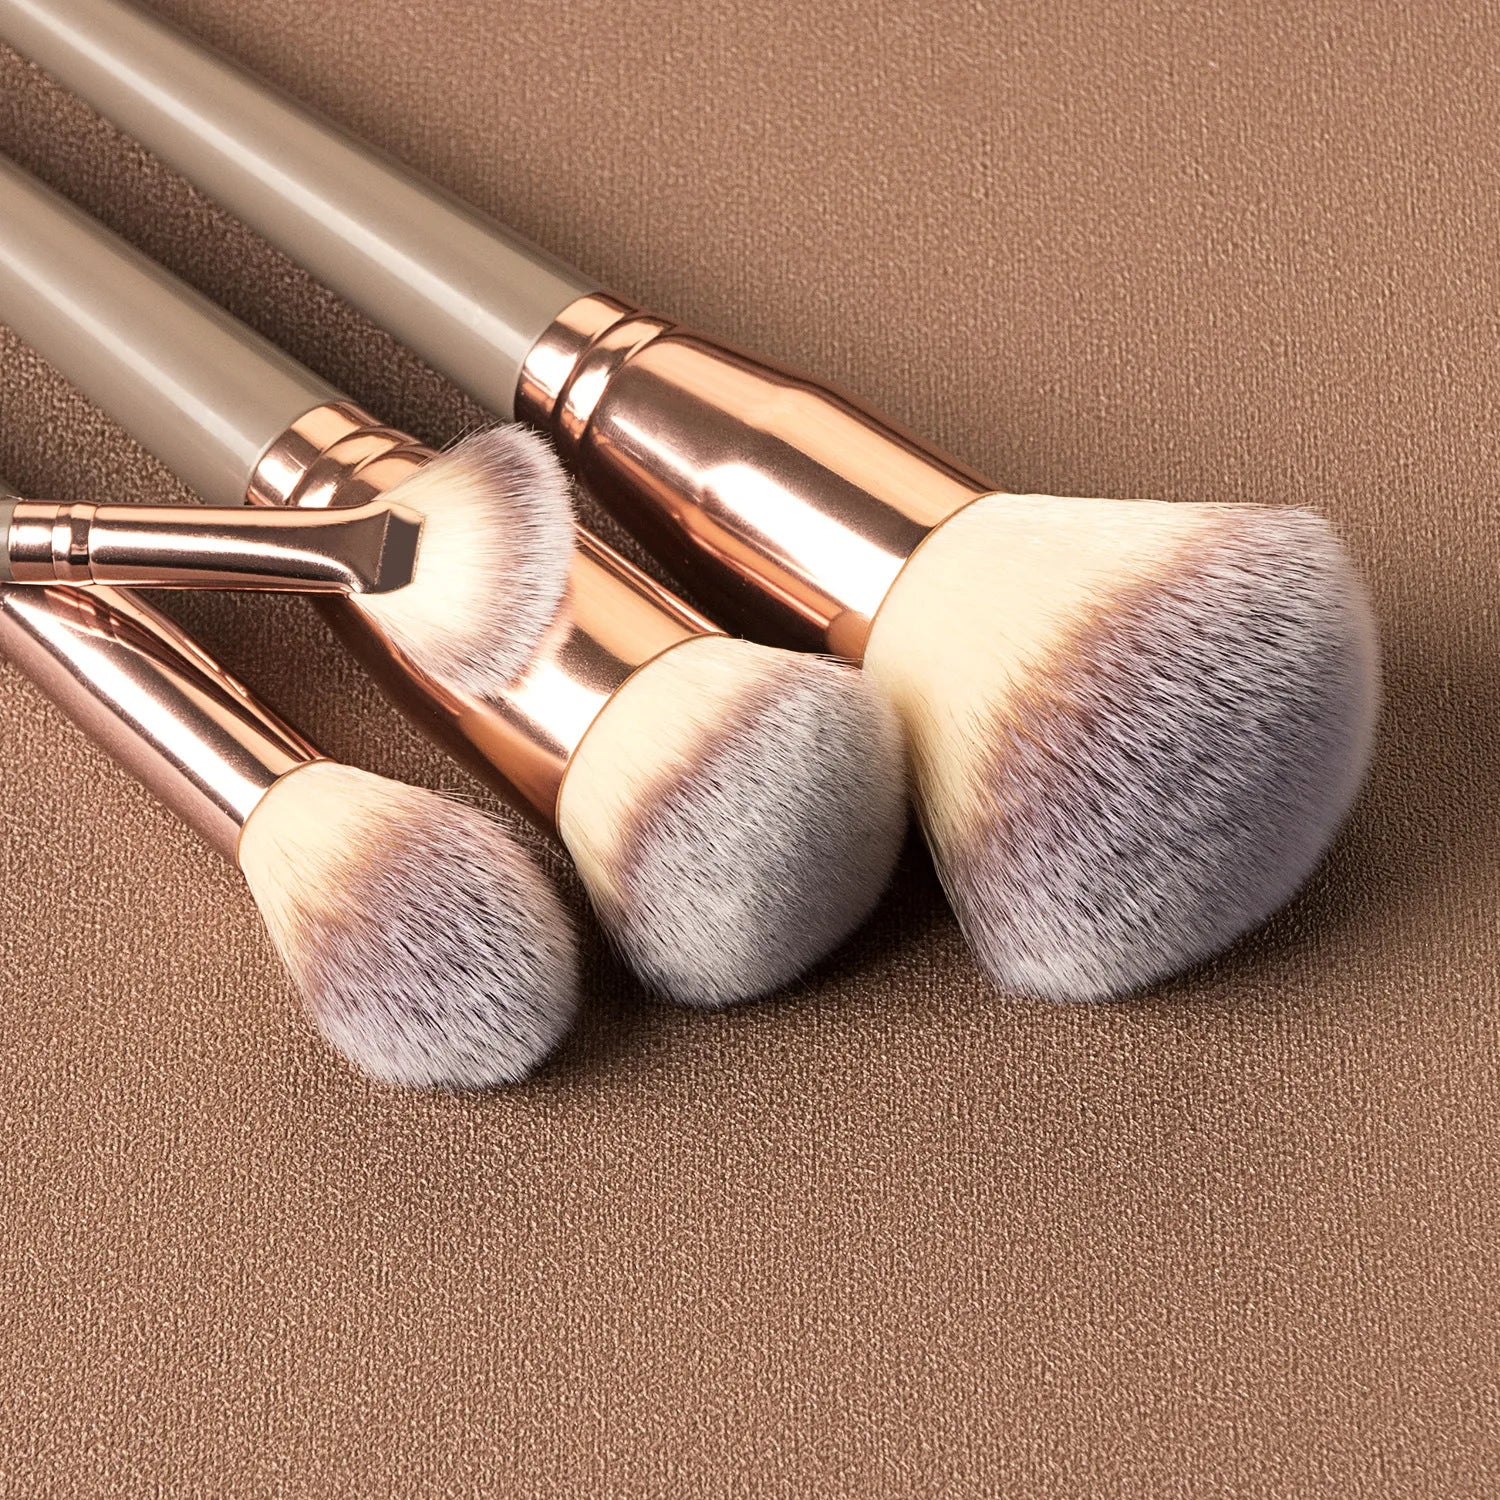 Ultimate Makeup Brush Set: Achieve Flawless Beauty Every Time